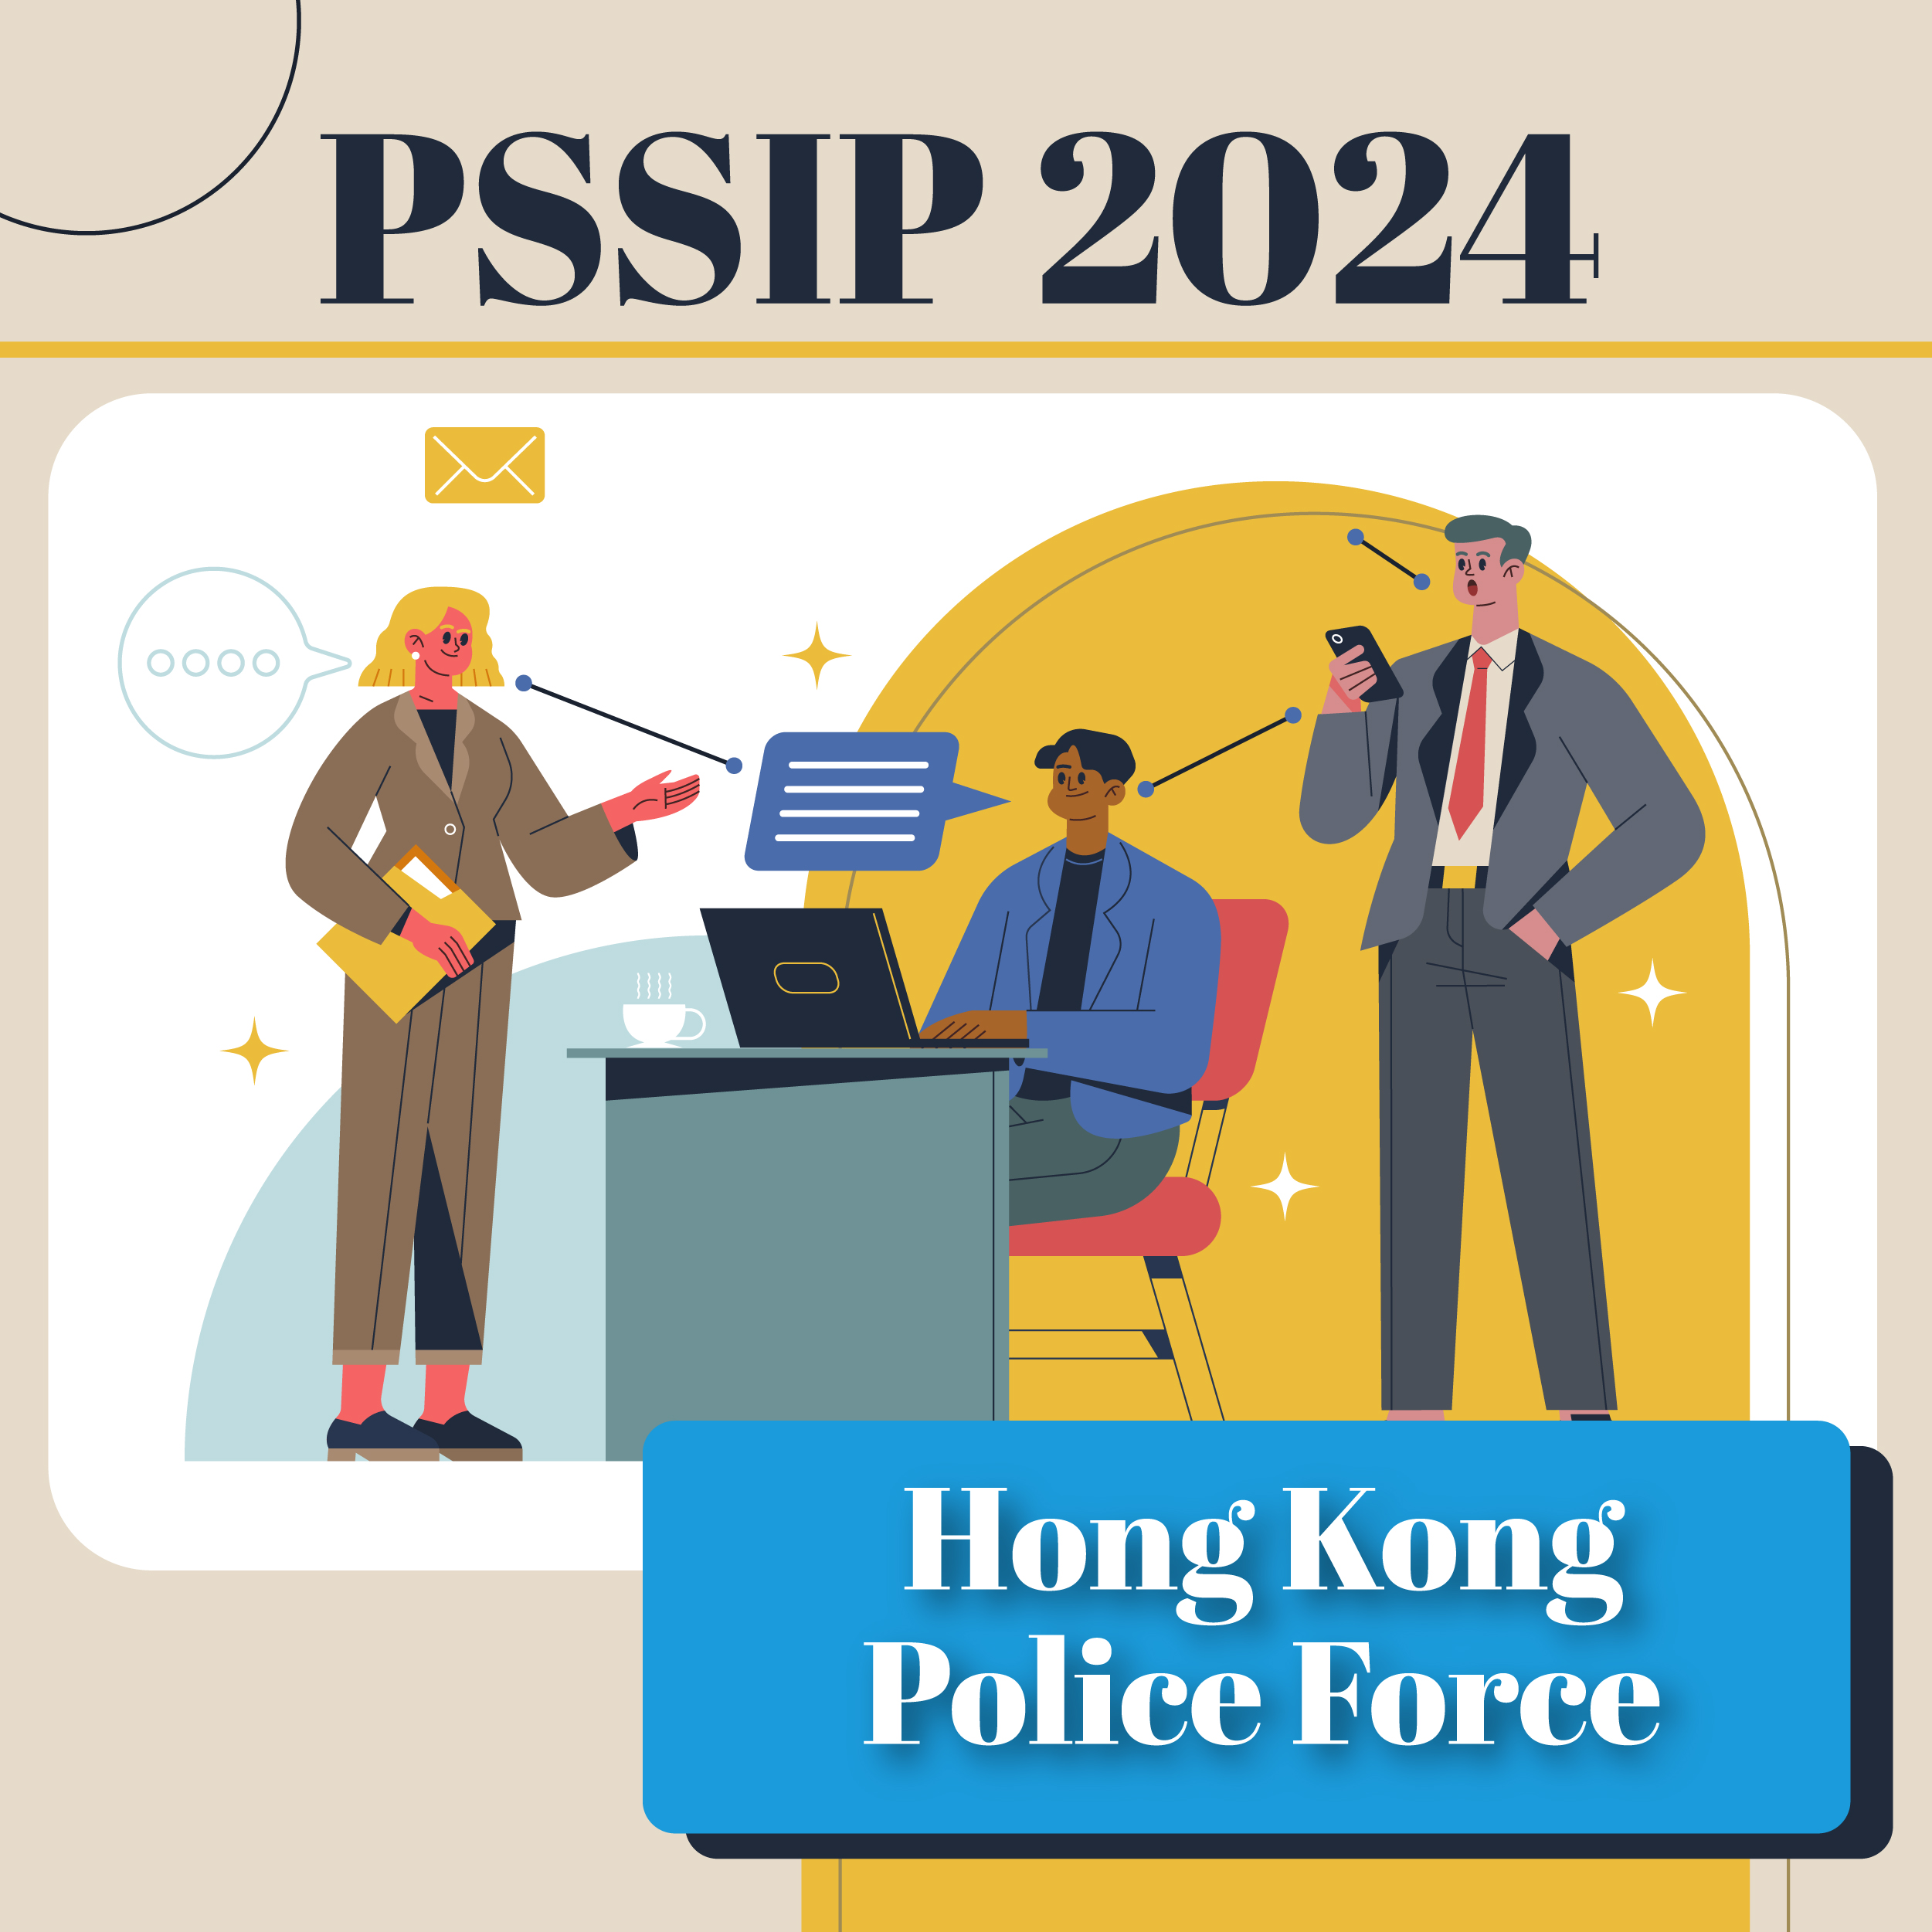 PSSIP2024 – Lantau District (Police and Community Relations Office), HKPF